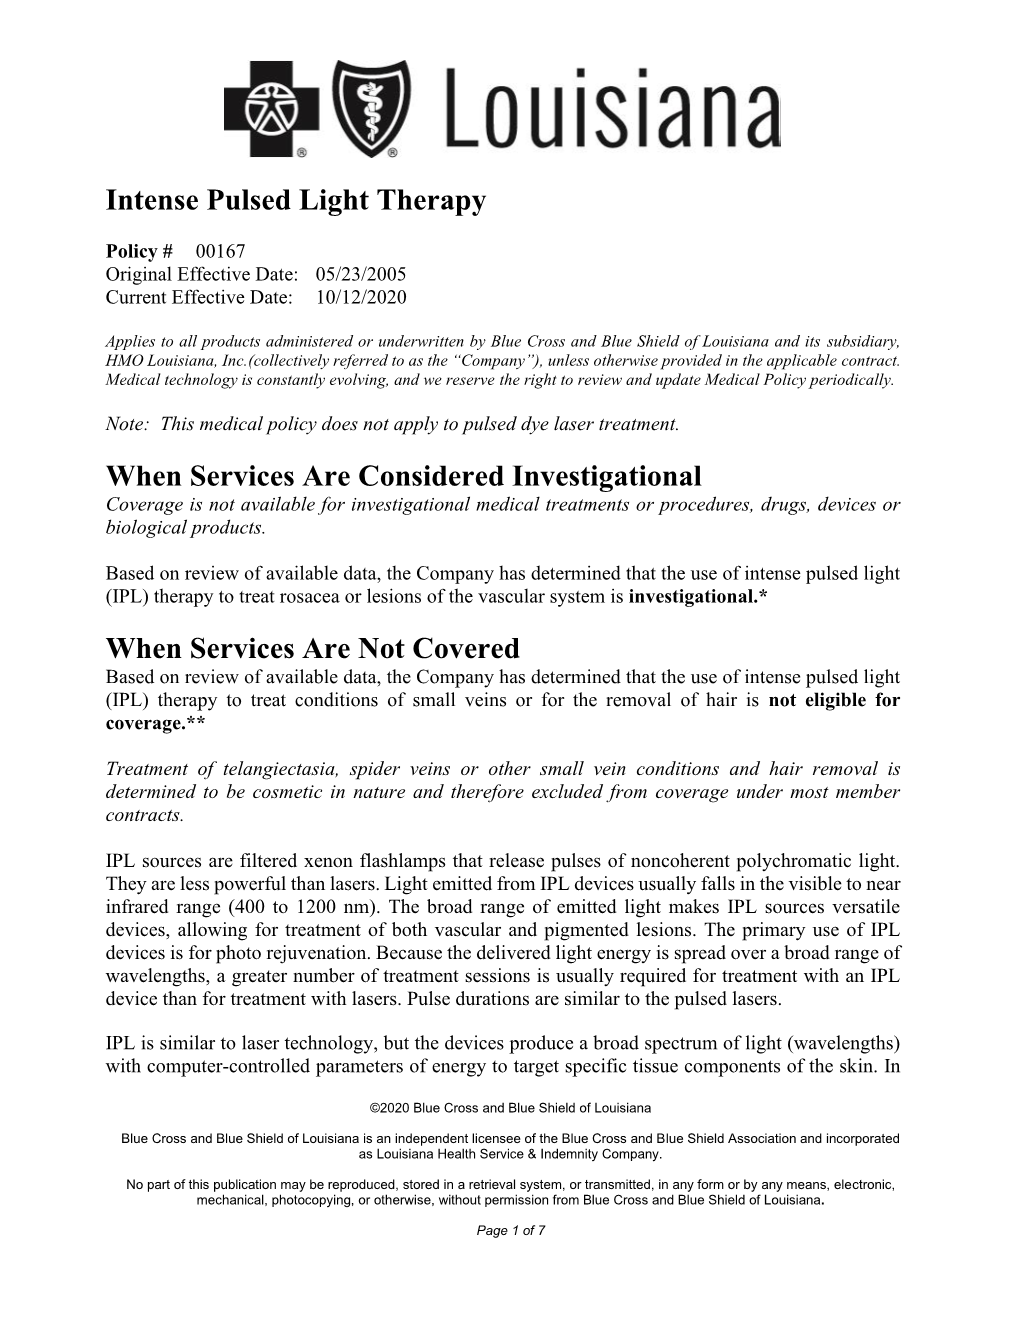 Intense Pulsed Light Therapy